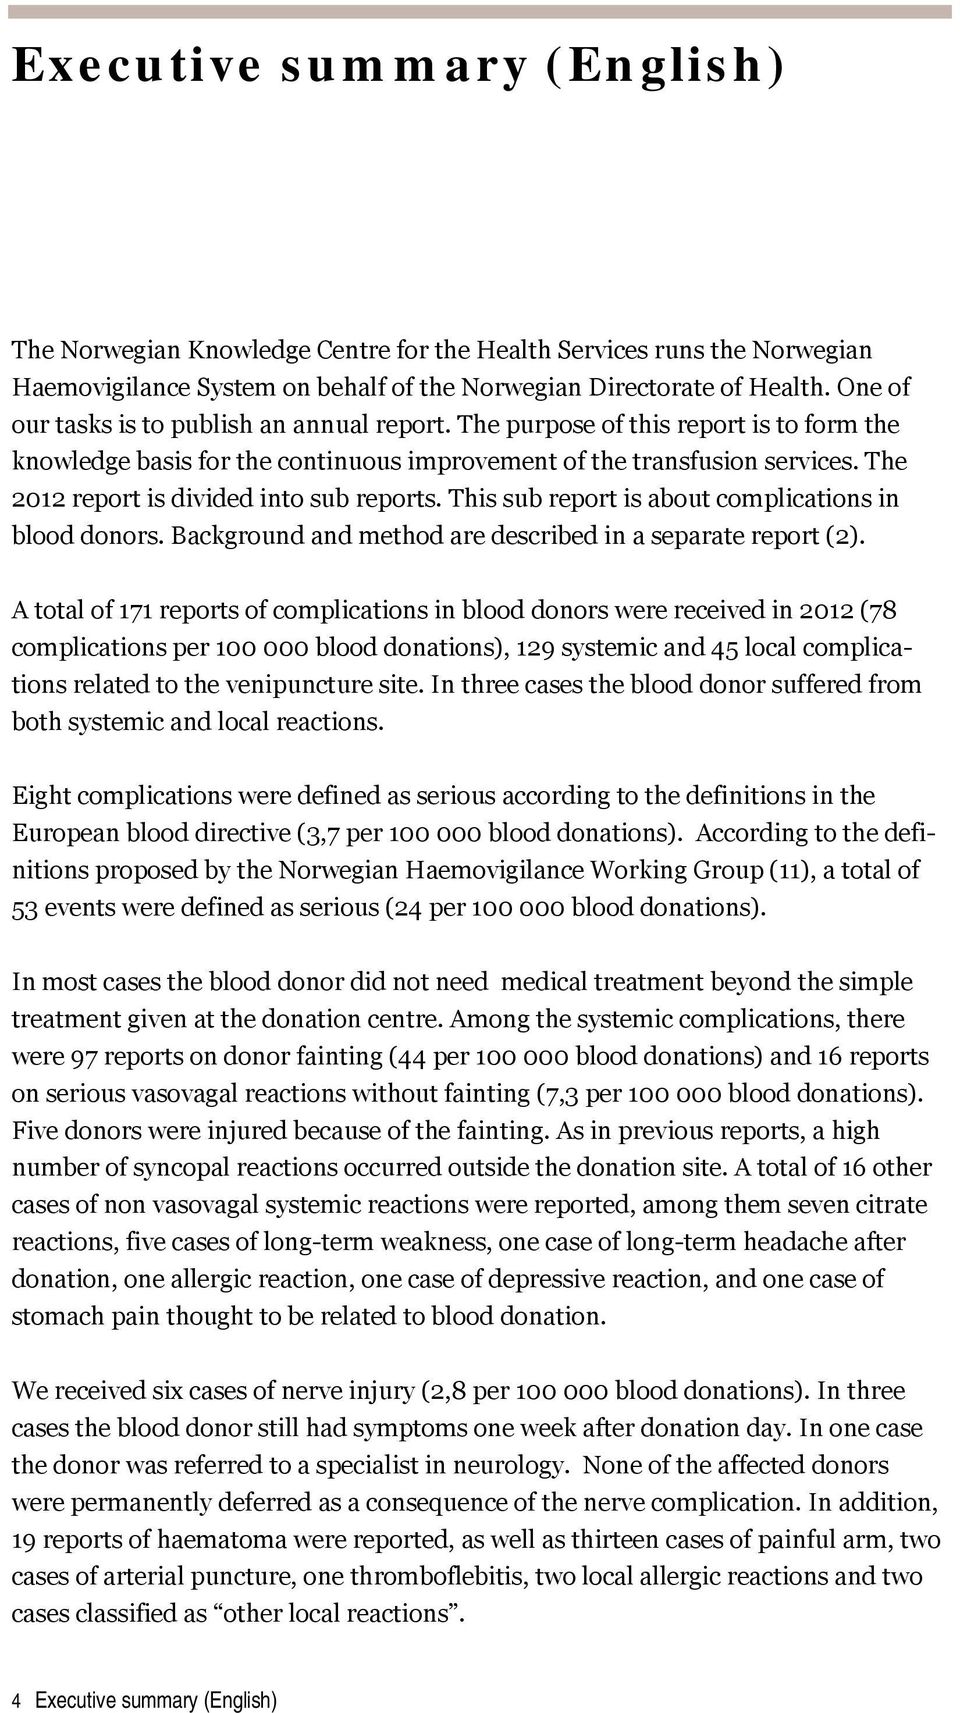 The 2012 report is divided into sub reports. This sub report is about complications in blood donors. Background and method are described in a separate report (2).